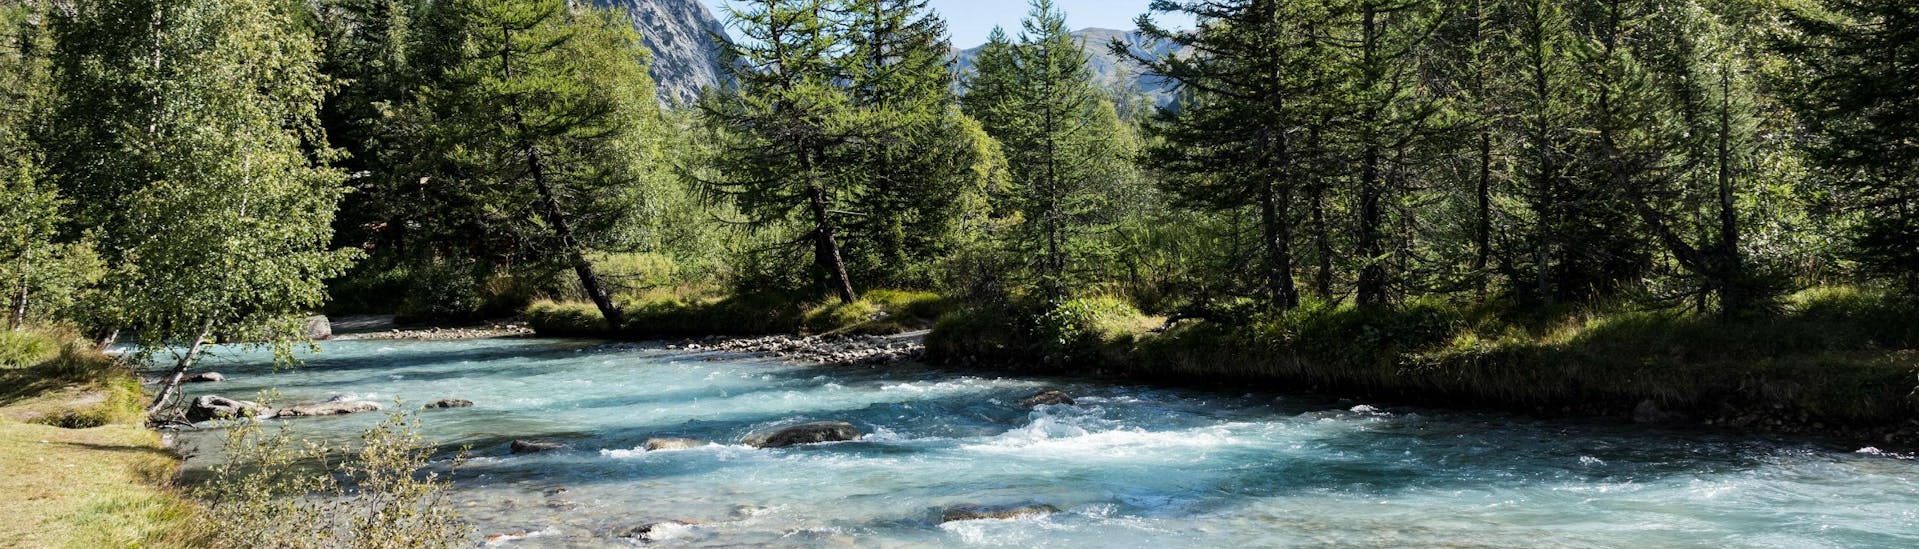 An image of a river flowing through the picturesque mountain scenery that people who go rafting in Aosta Valley get to experience.